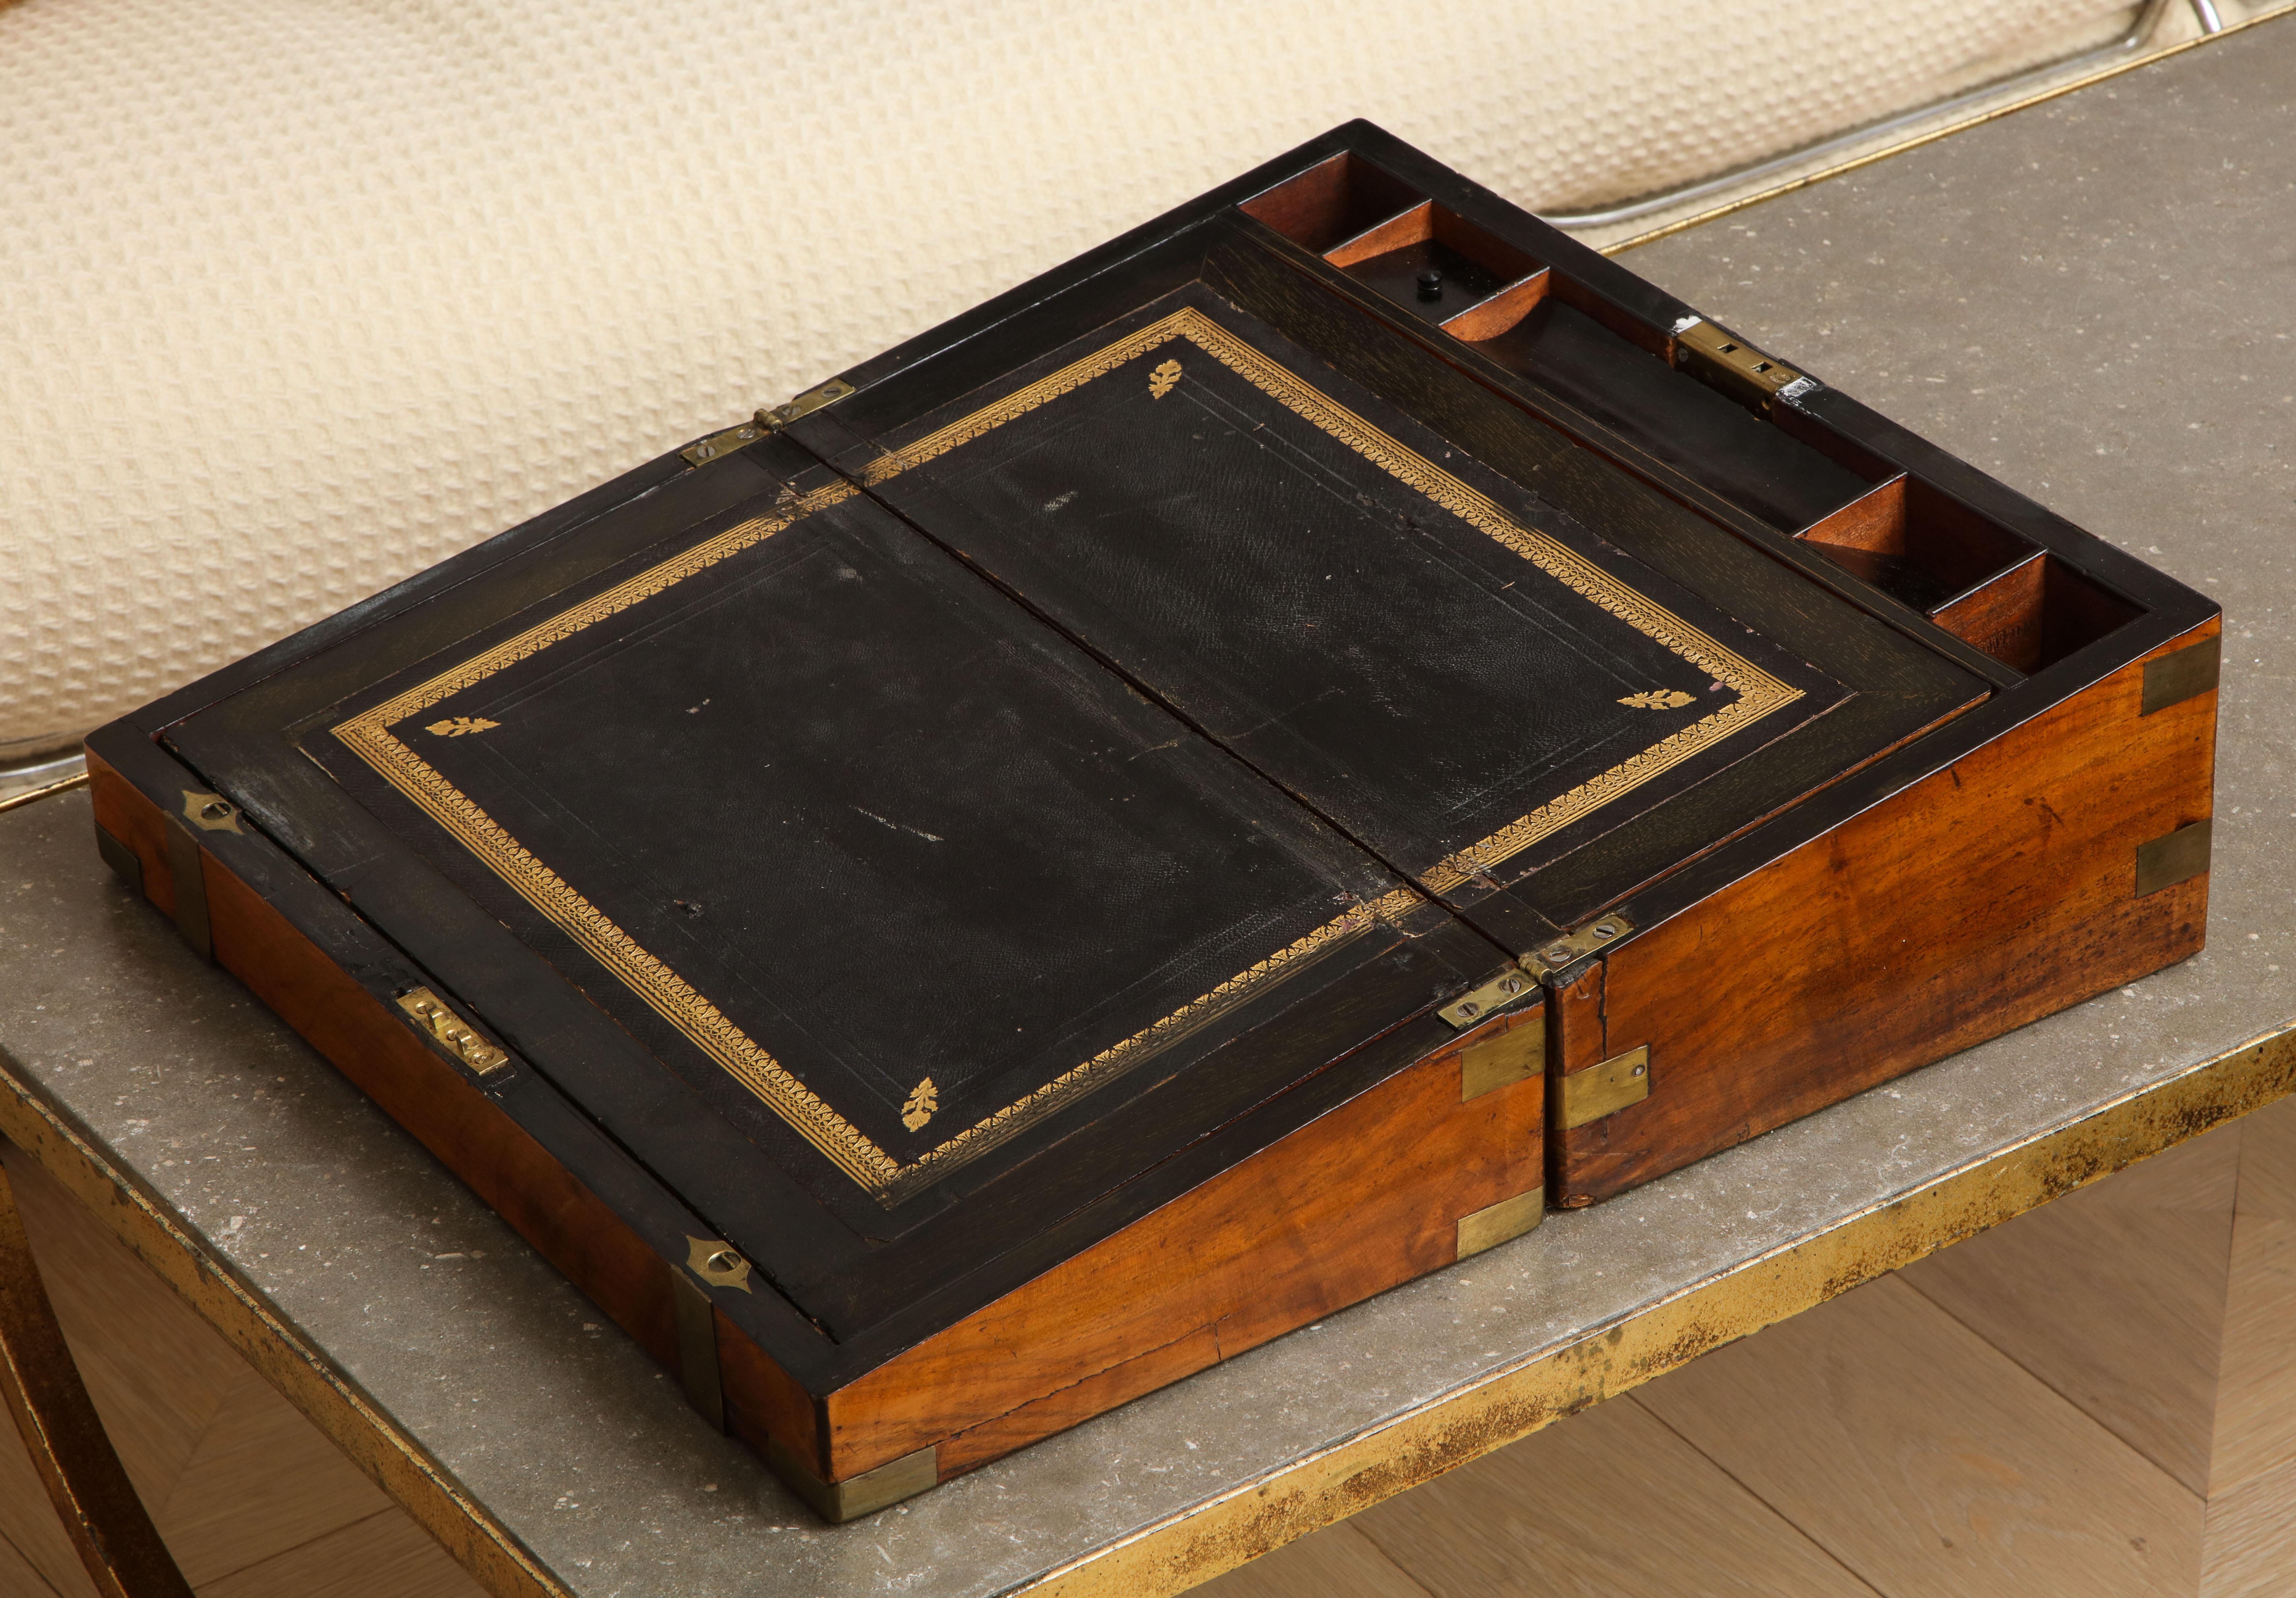 19th century English Campaign portable mahogany writing box with brass bound molded edges and brass banding. Black leather writing slope with gold edge details and the rear half opens for storage. Unmarked brass plate on top. 

When full open,